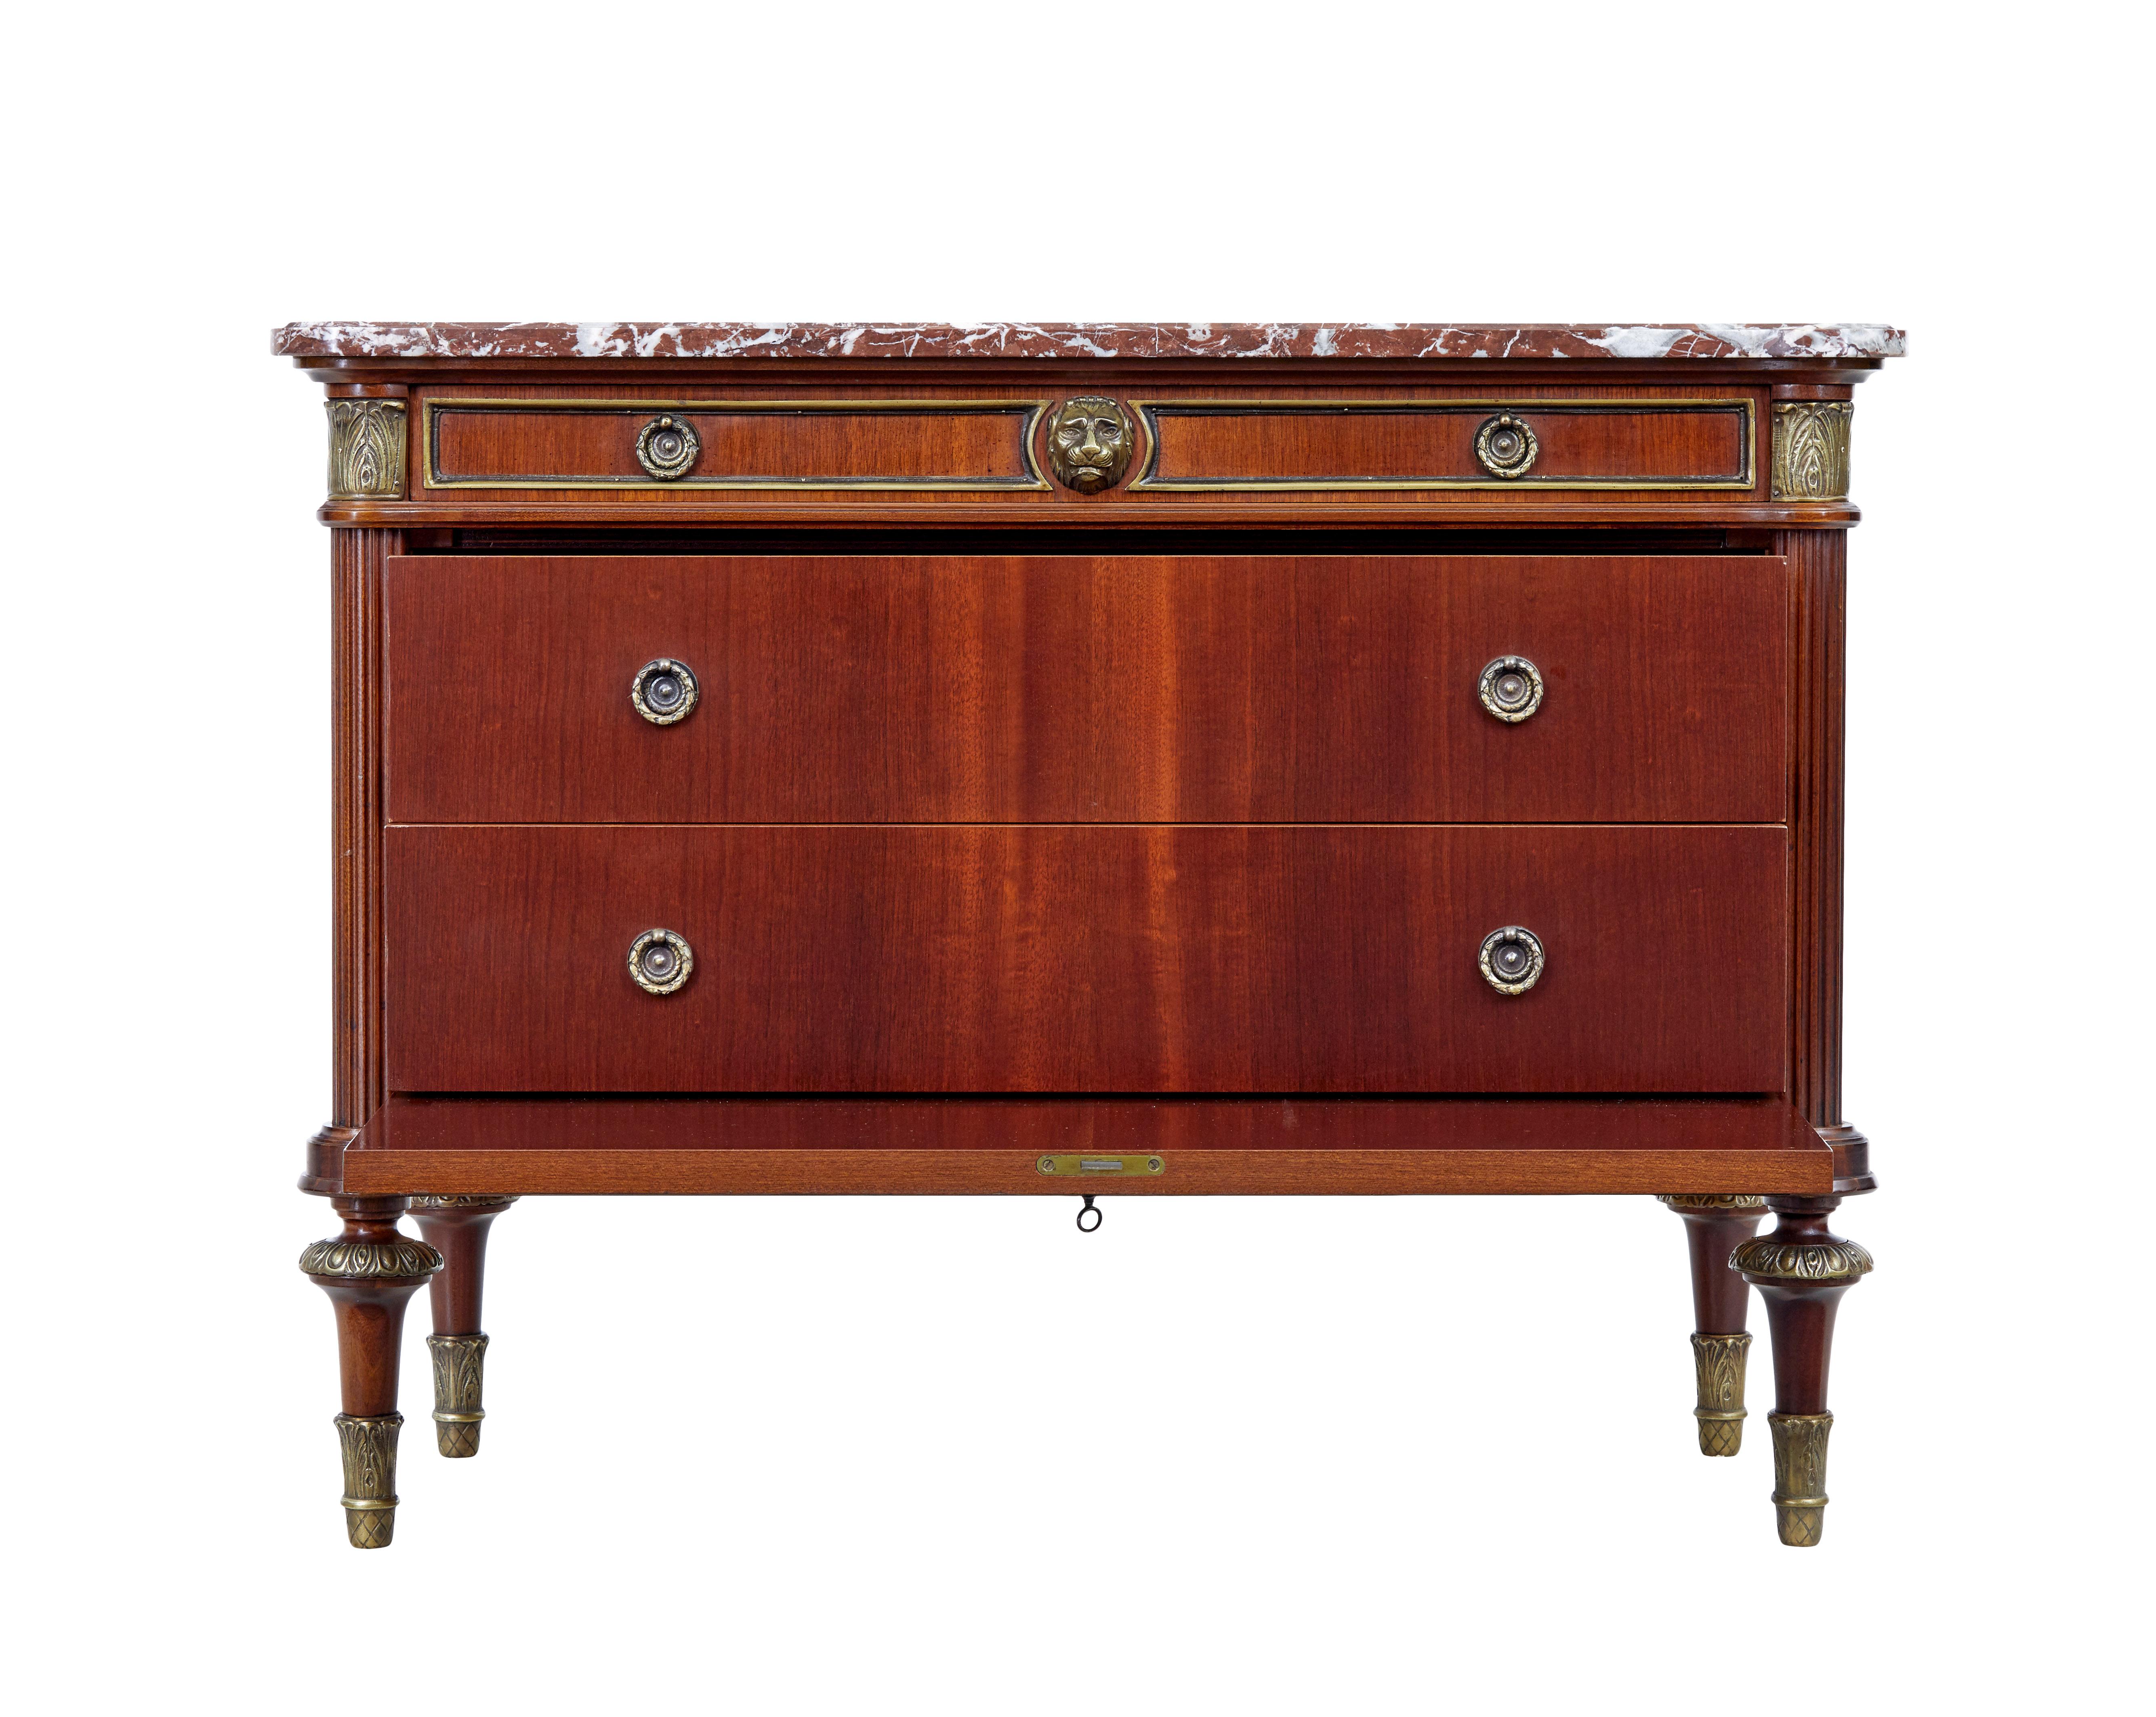 Cast Midcentury Ornate Mahogany Marble Top Chest of Drawers For Sale